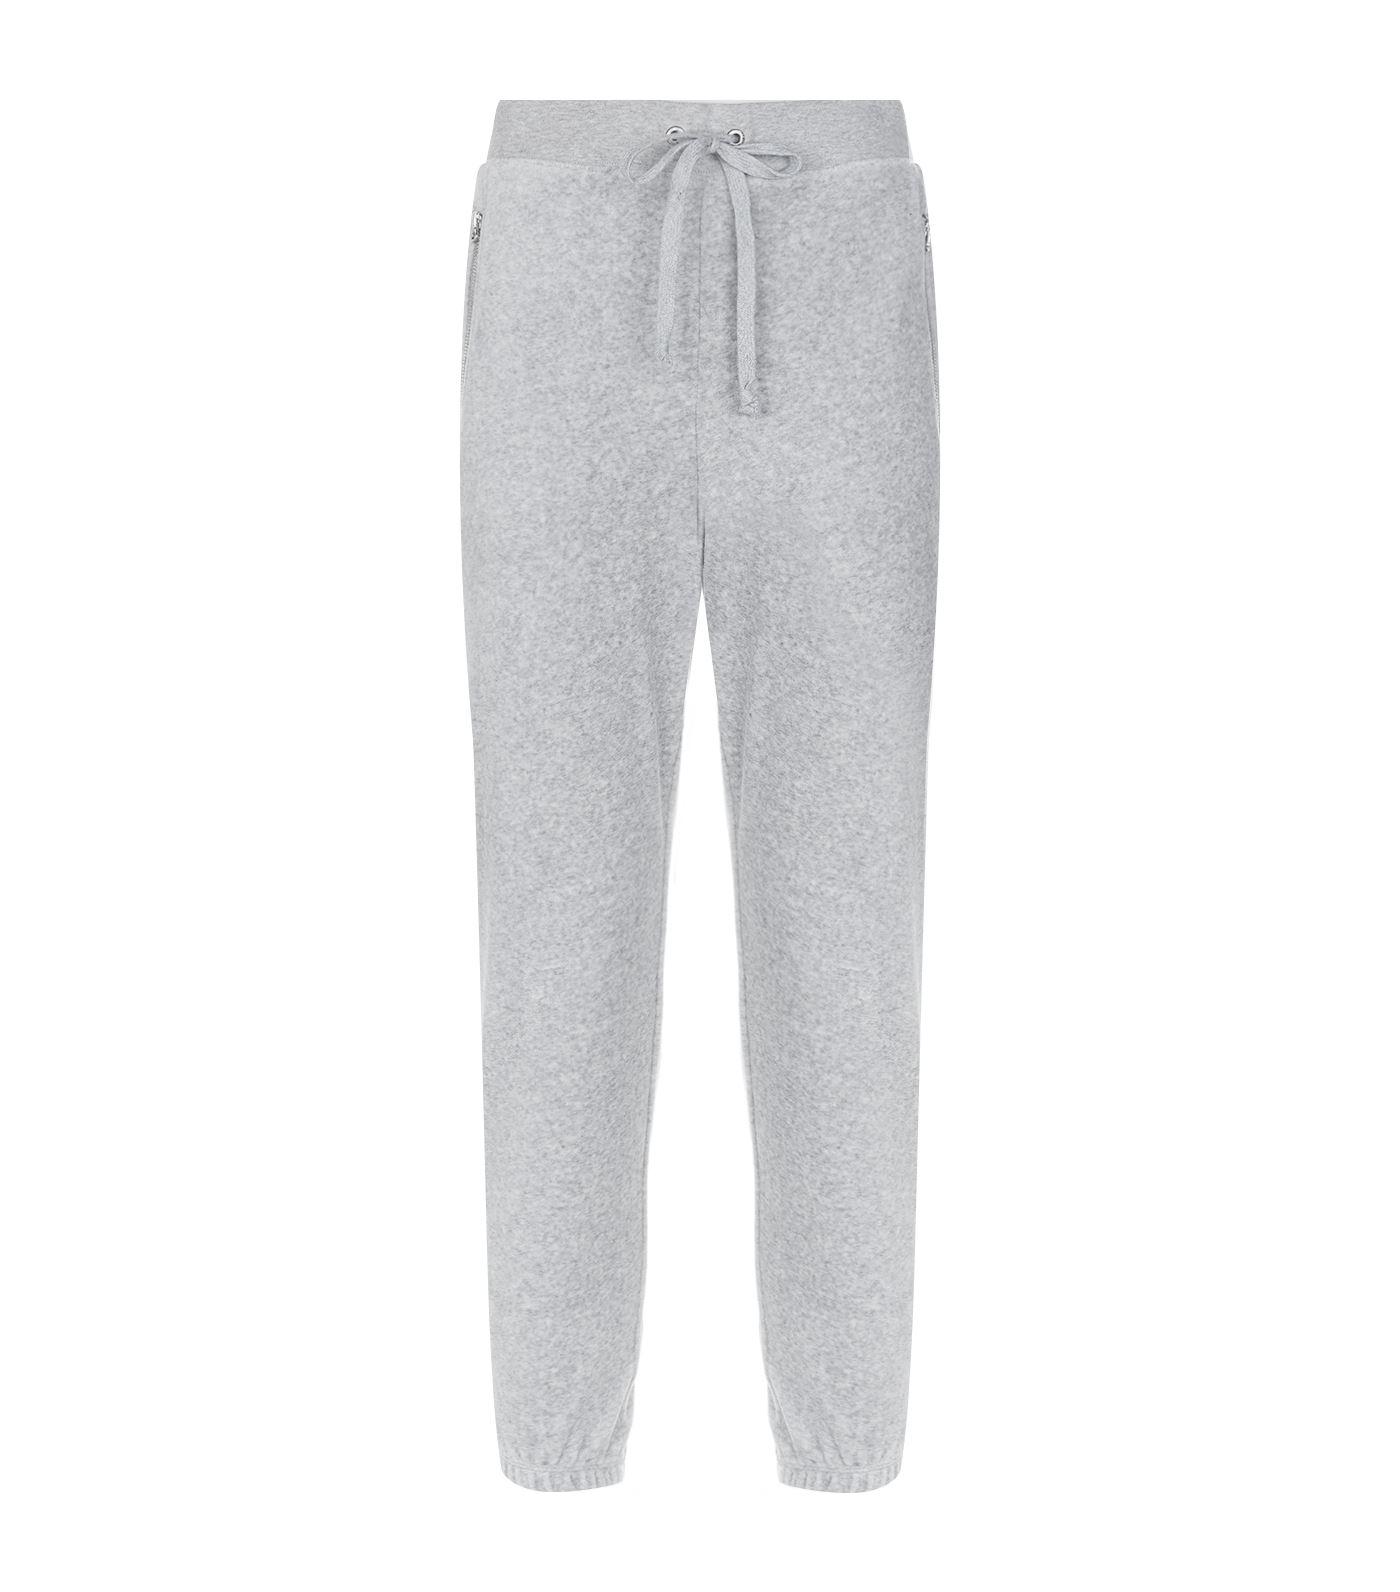 Juicy Couture Silverlake Velour Sweatpants in Grey (Gray) - Lyst